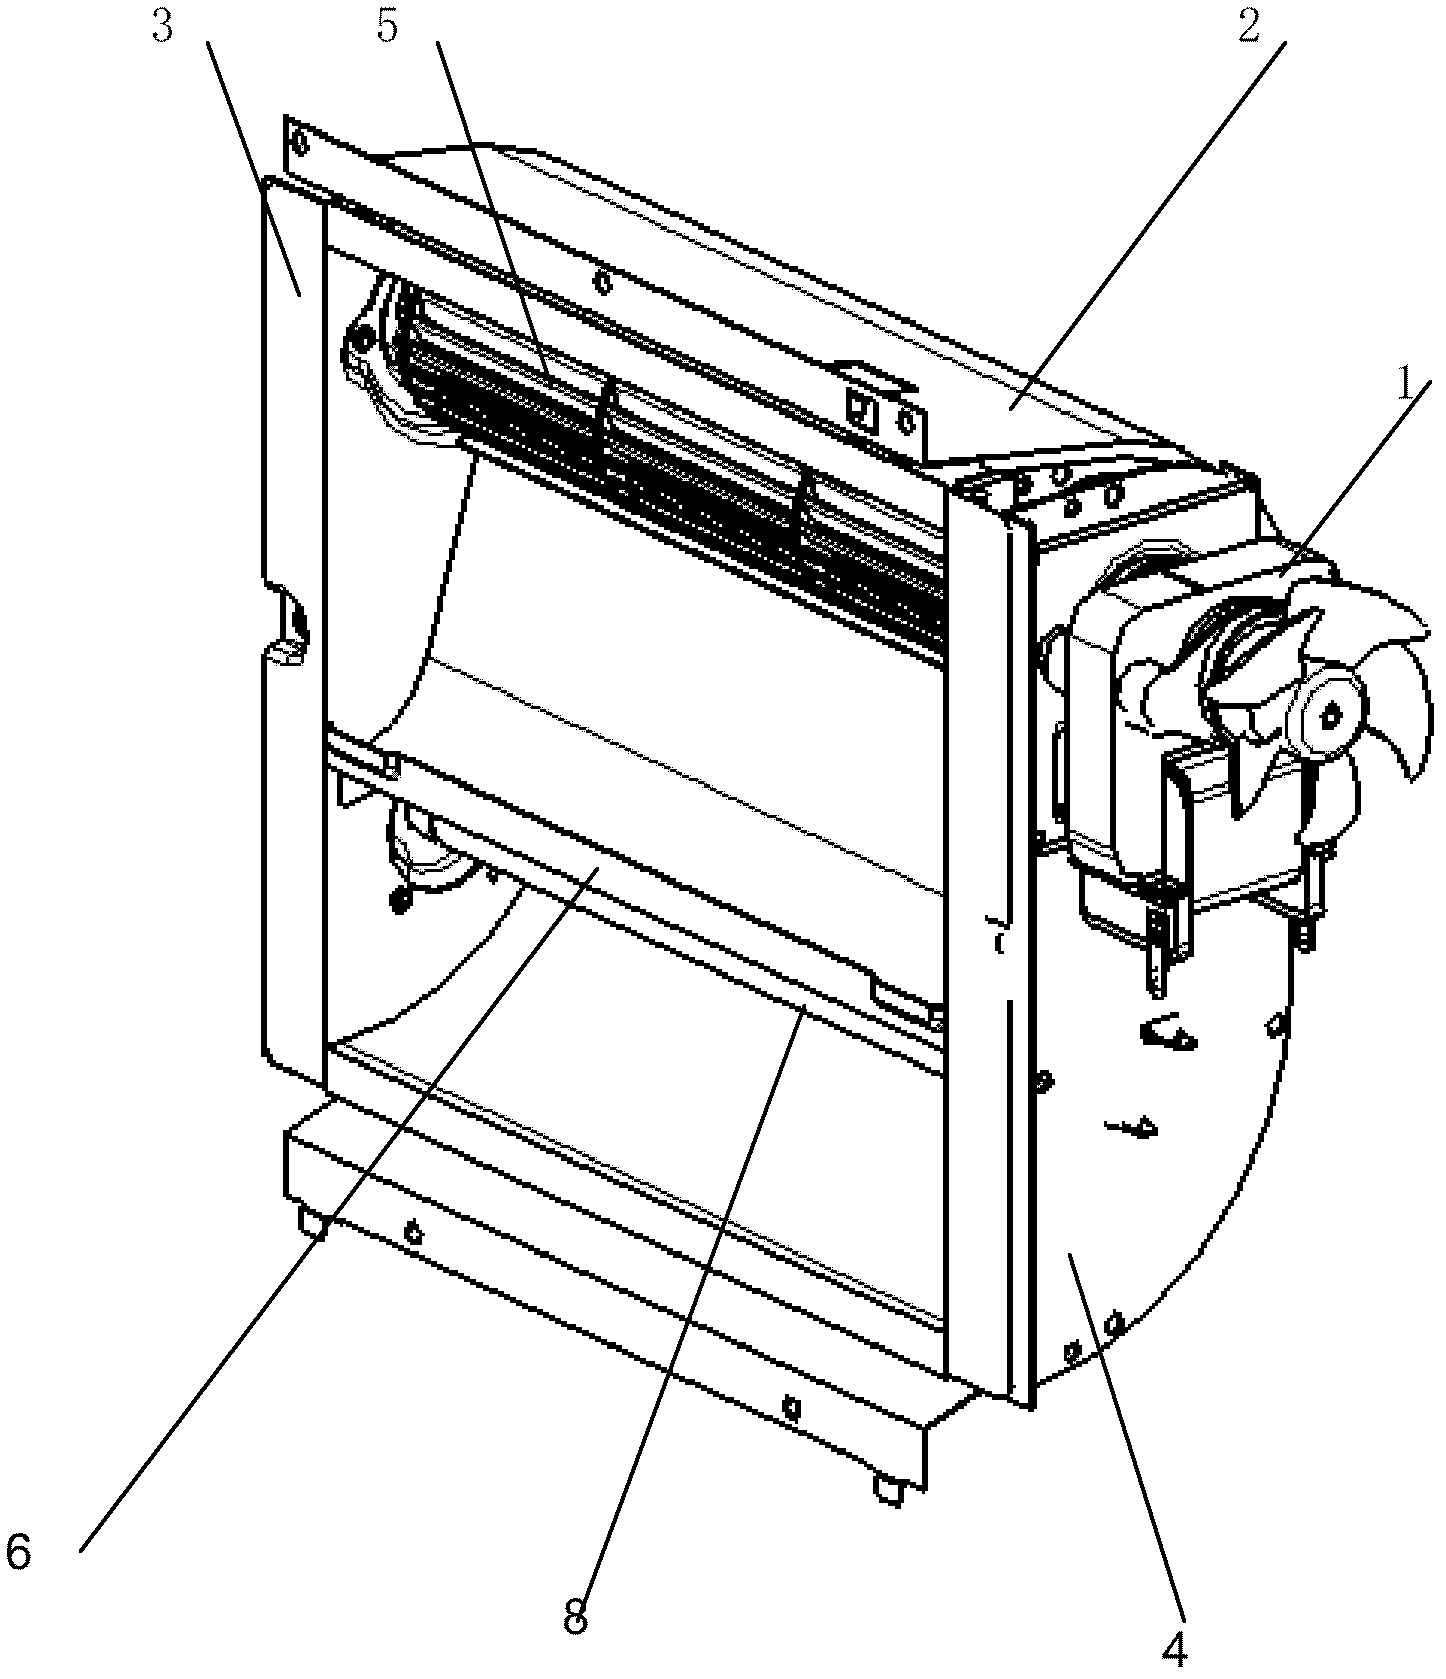 Convective microwave oven